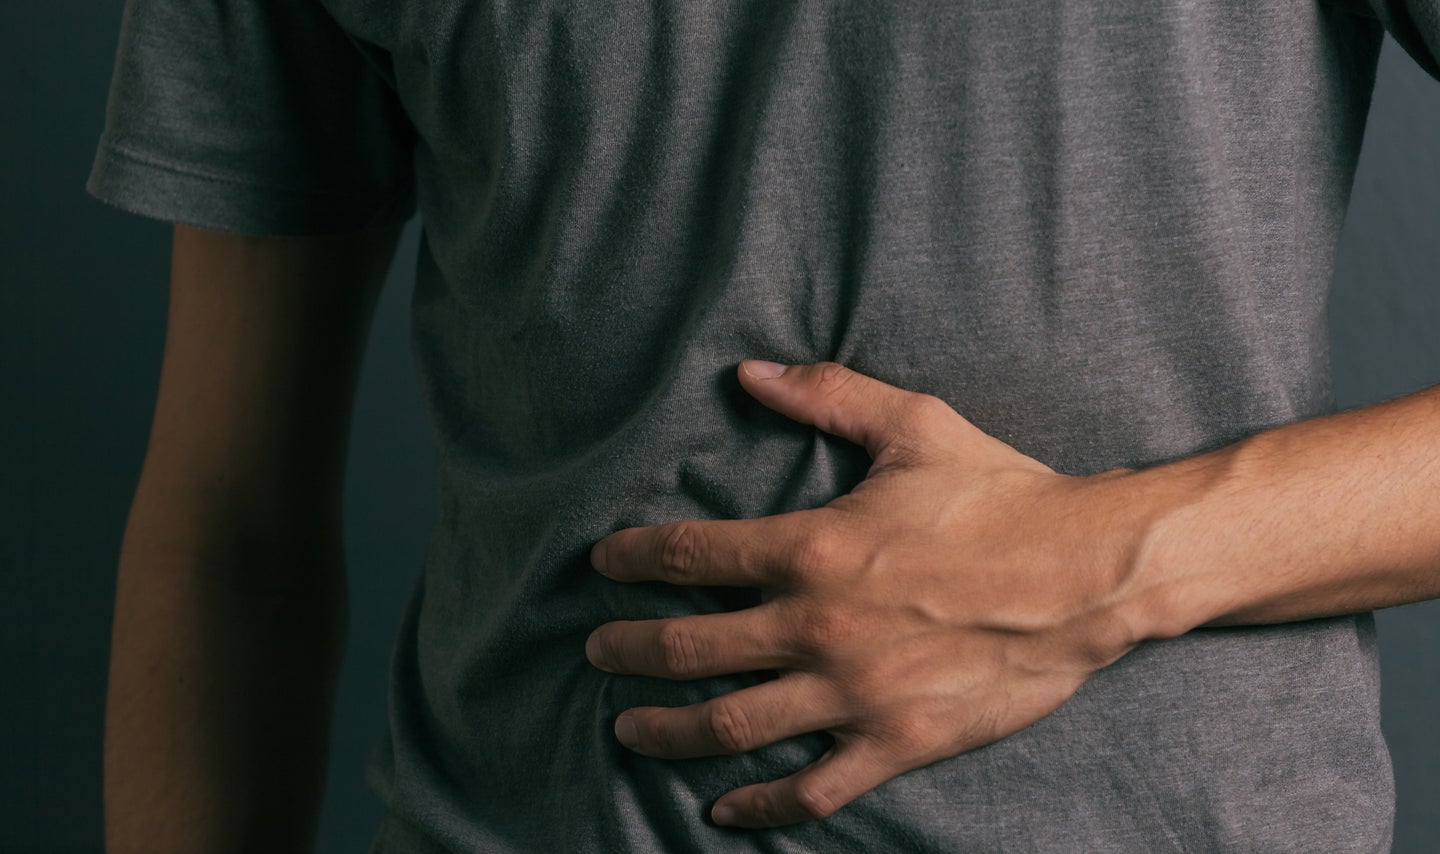 a person in a gray shirt their hand over their stomach under dark lighting